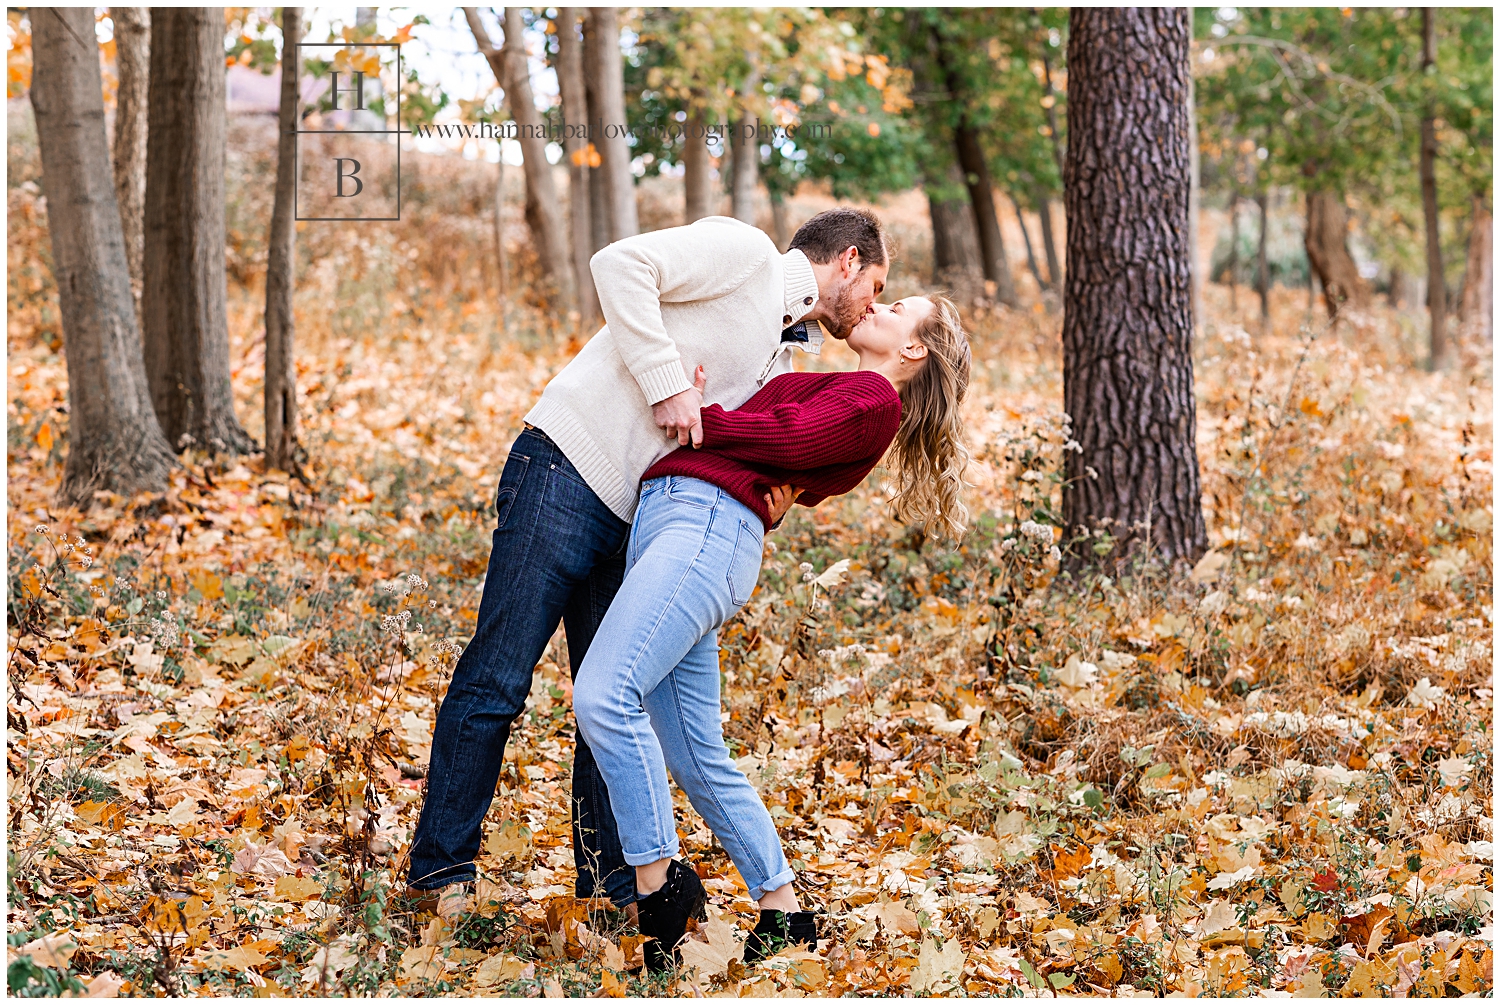 Man dips woman standing in orange fall leaves for a kiss.